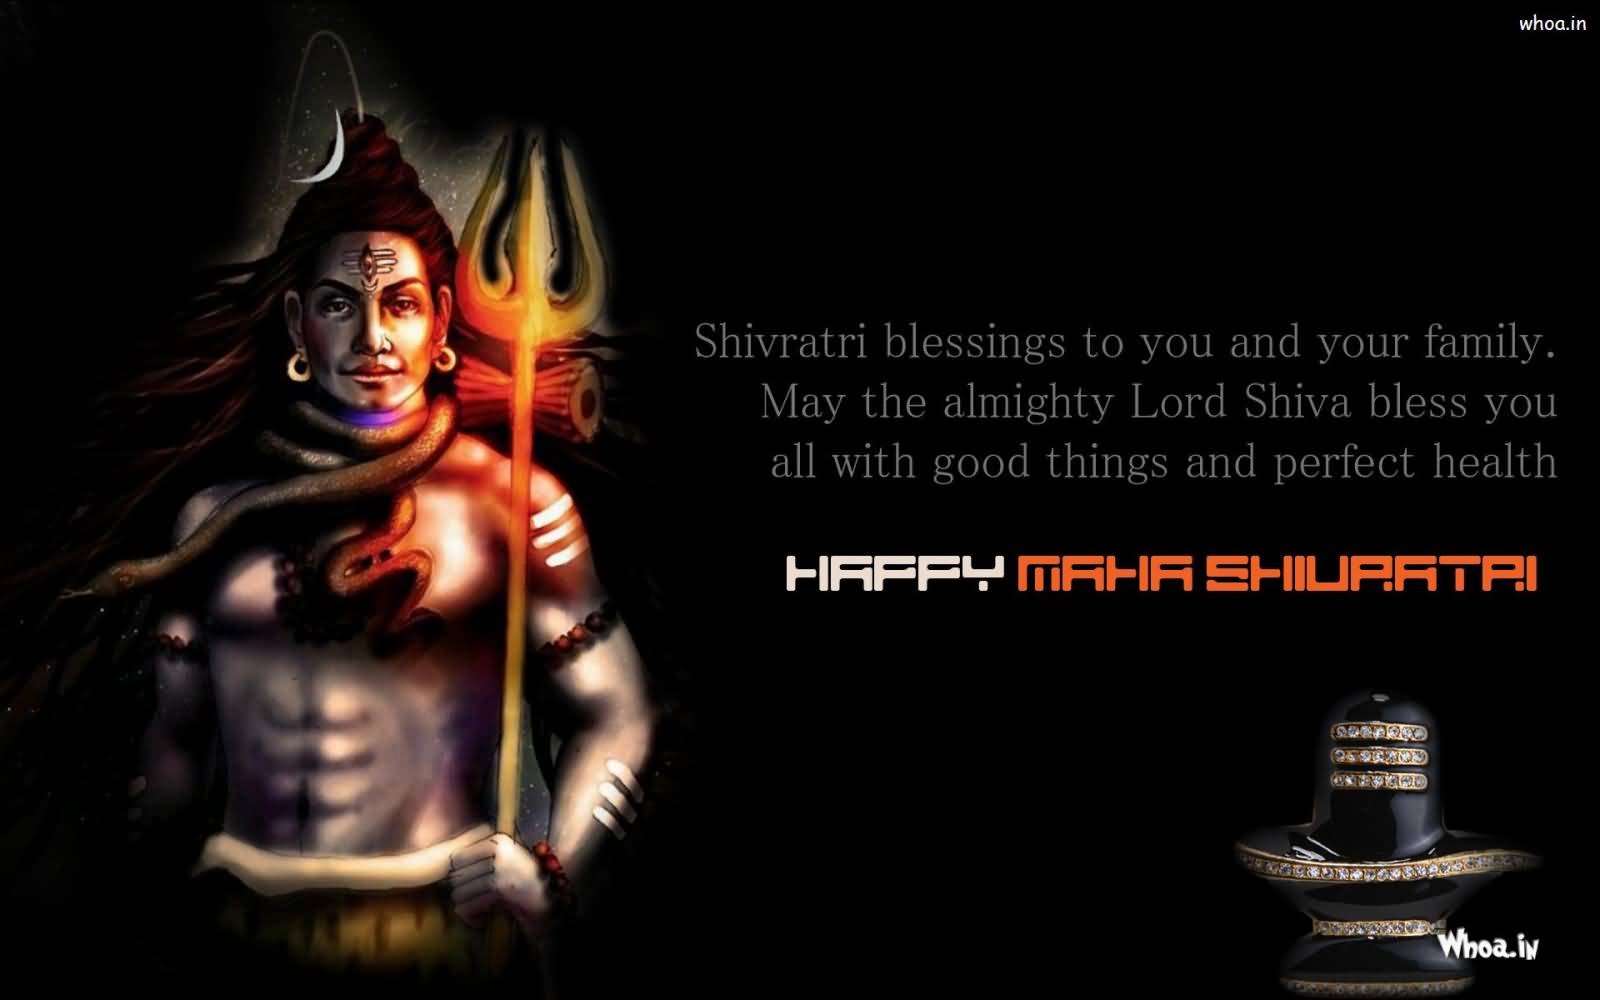 Shivratri Blessings To You And Your Family. May The Almighty Lord Shiva Bless You All With Good Things And Perfect Health Happy Maha Shivratri 2017